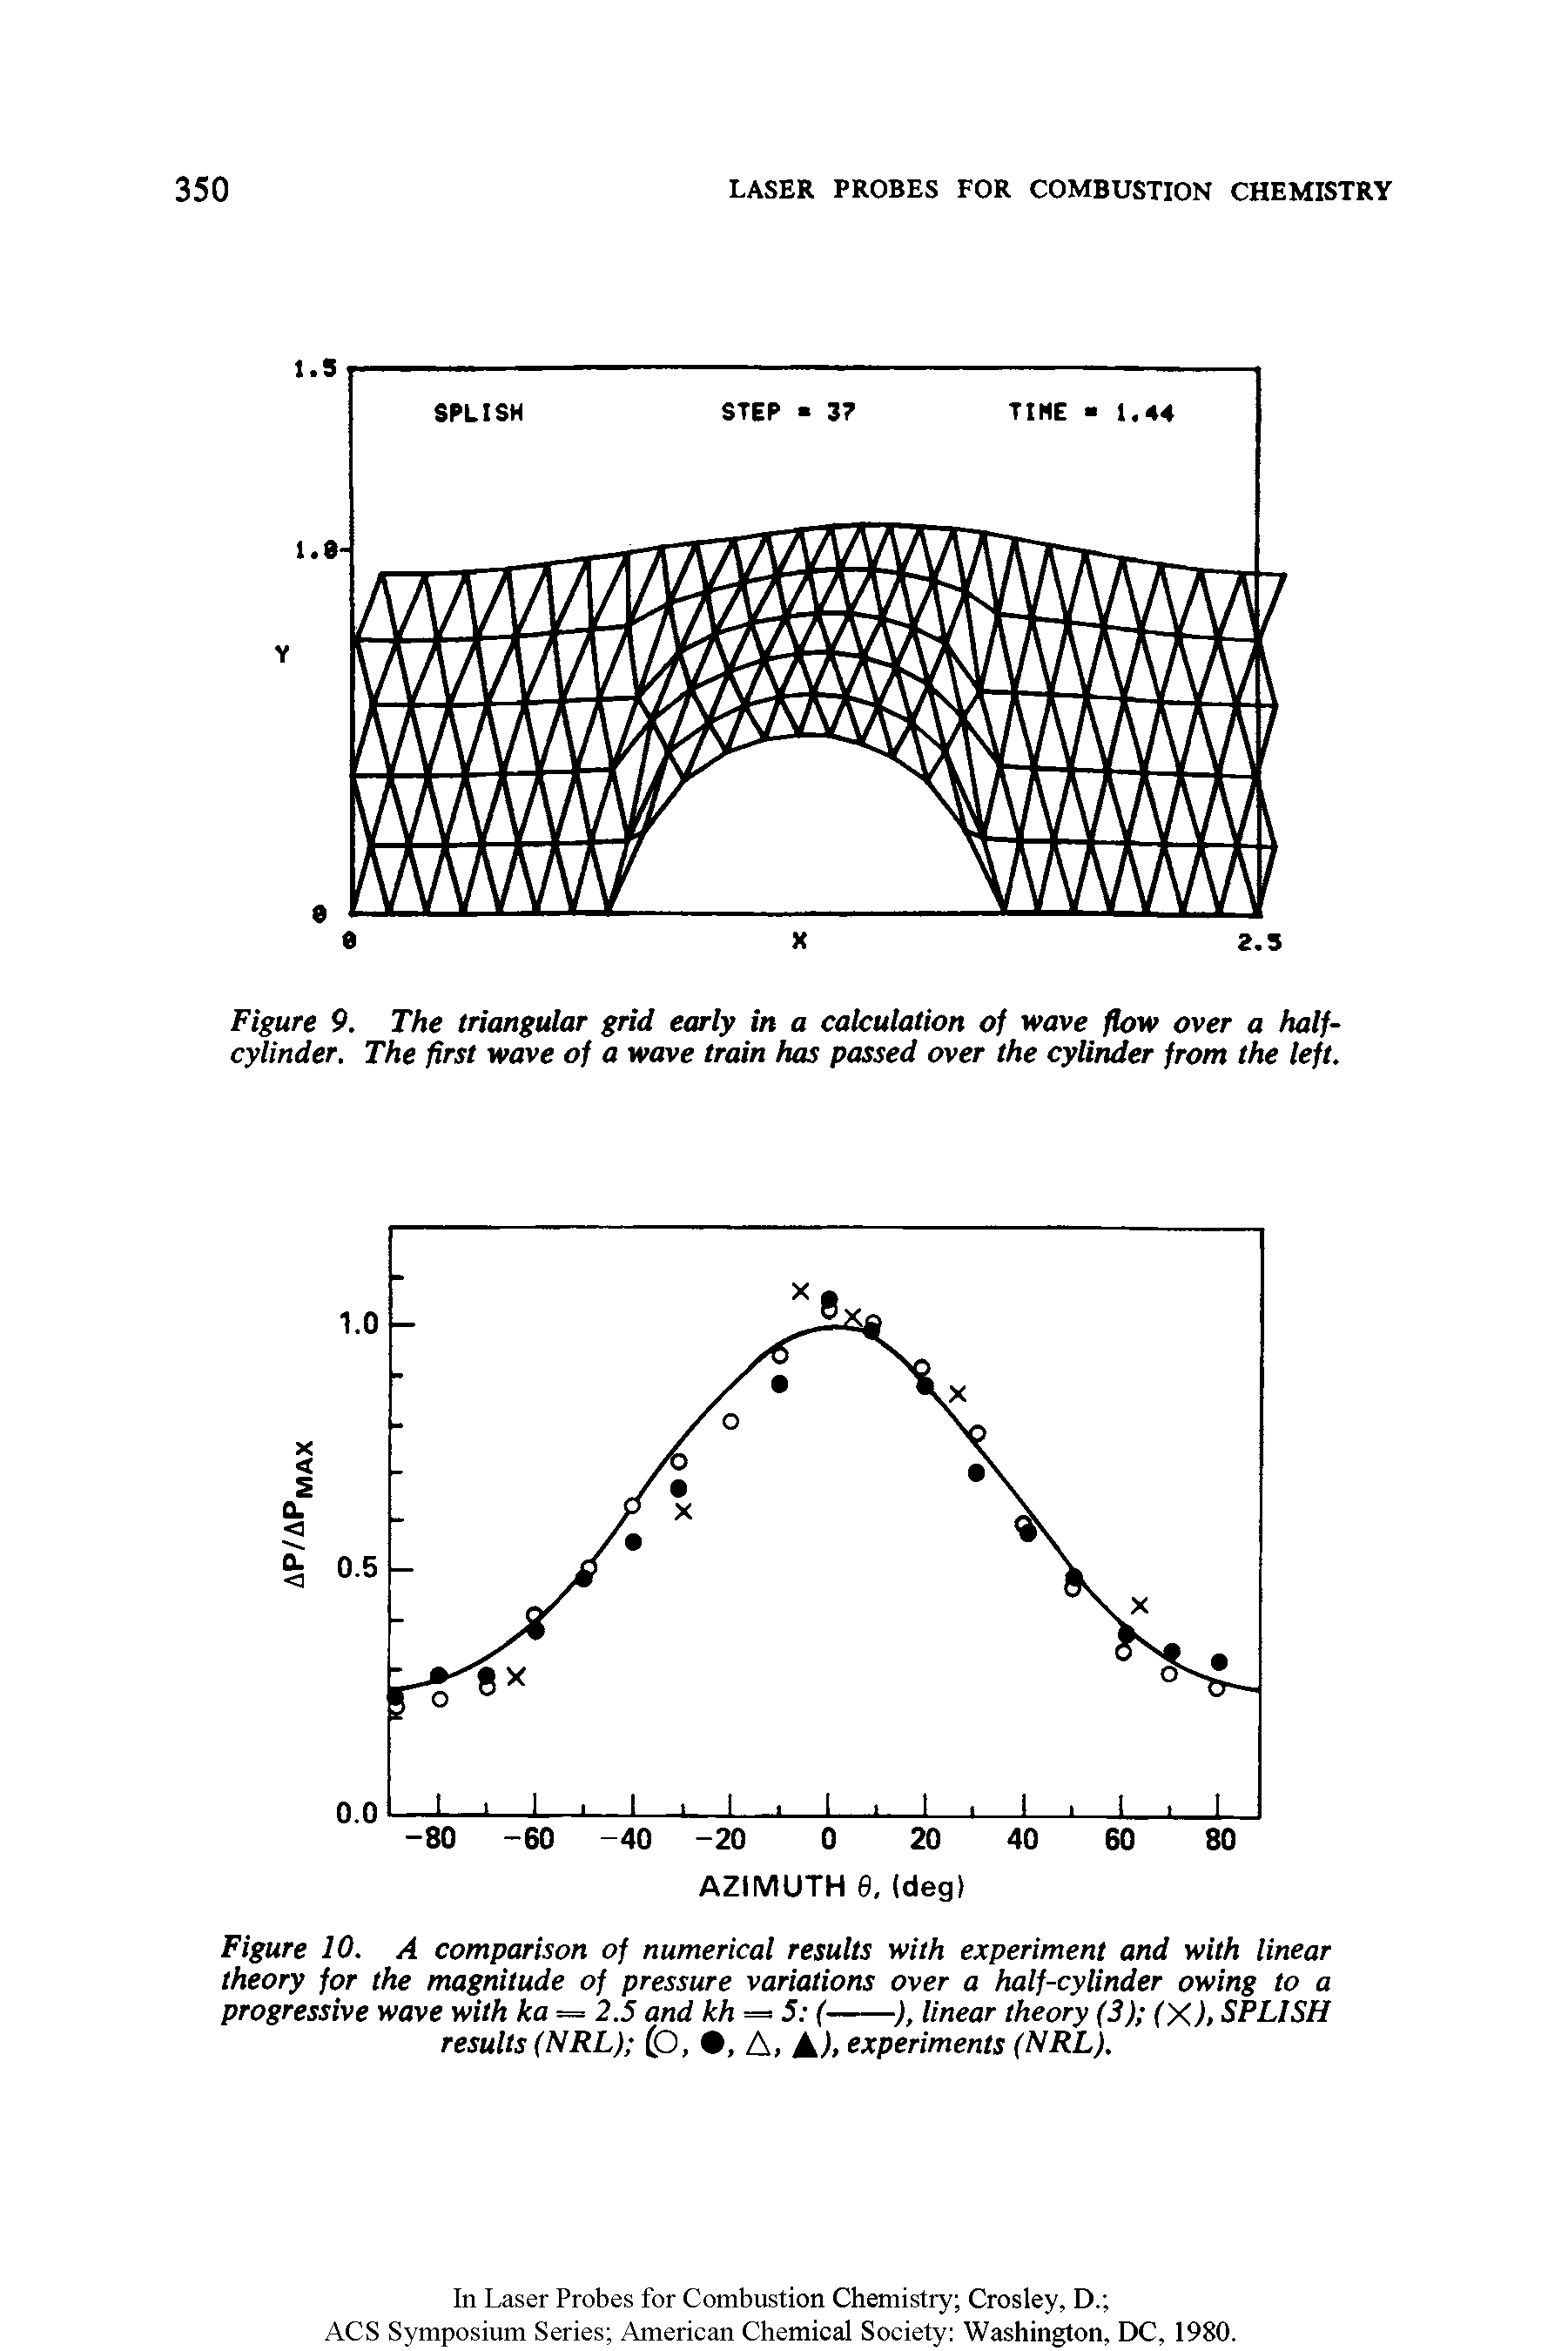 Figure 10. A comparison of numerical results with experiment and with linear theory for the magnitude of pressure variations over a half-cylinder owing to a...